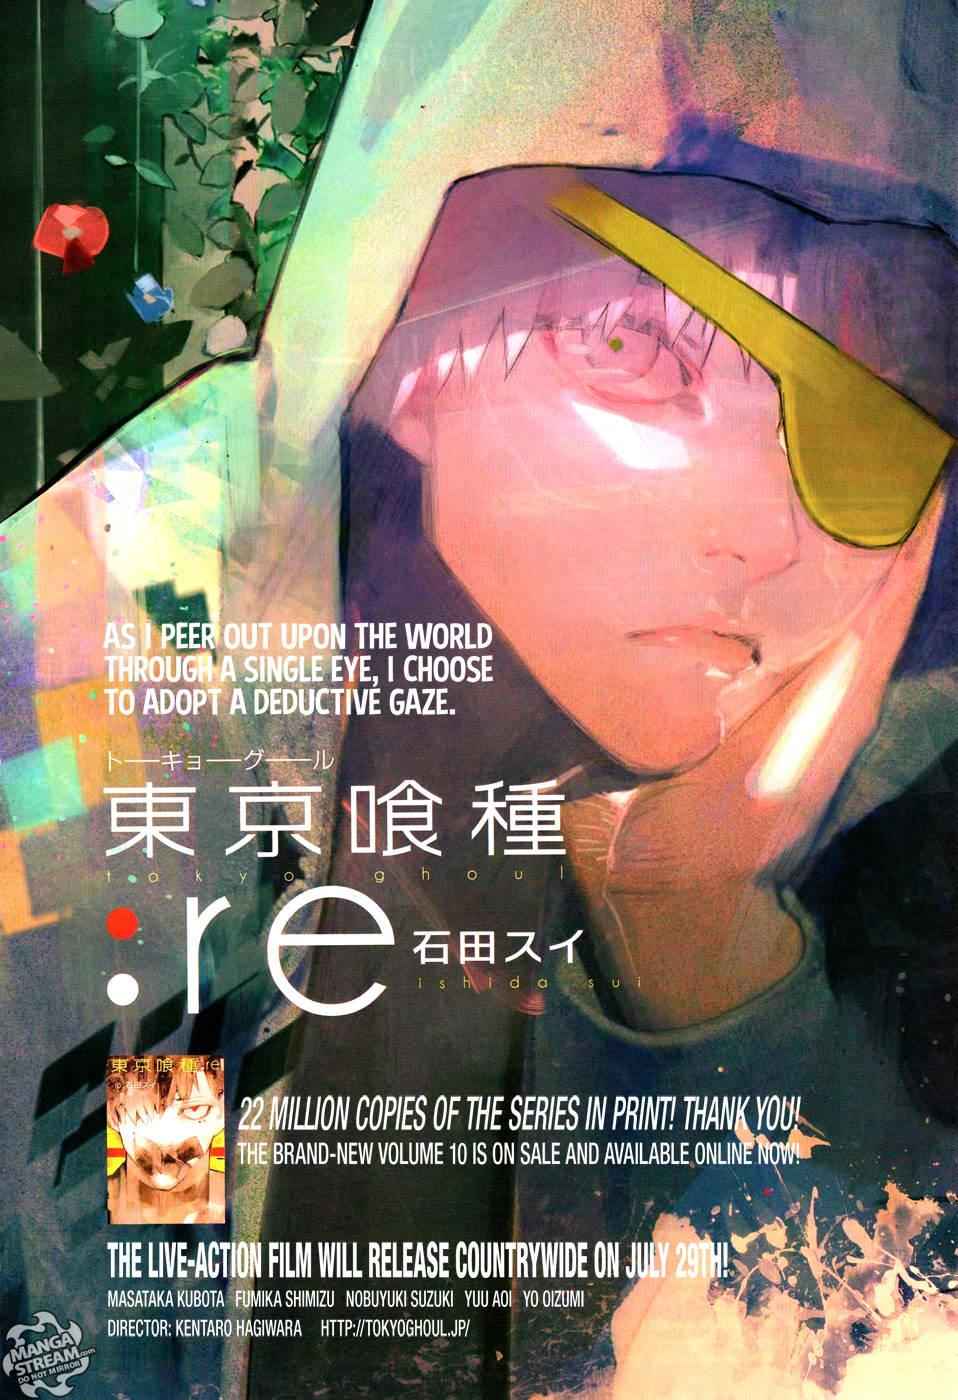 Tokyo Ghoul Re Chapter 117 Thumb Up Tokyo Ghoul Manga Online